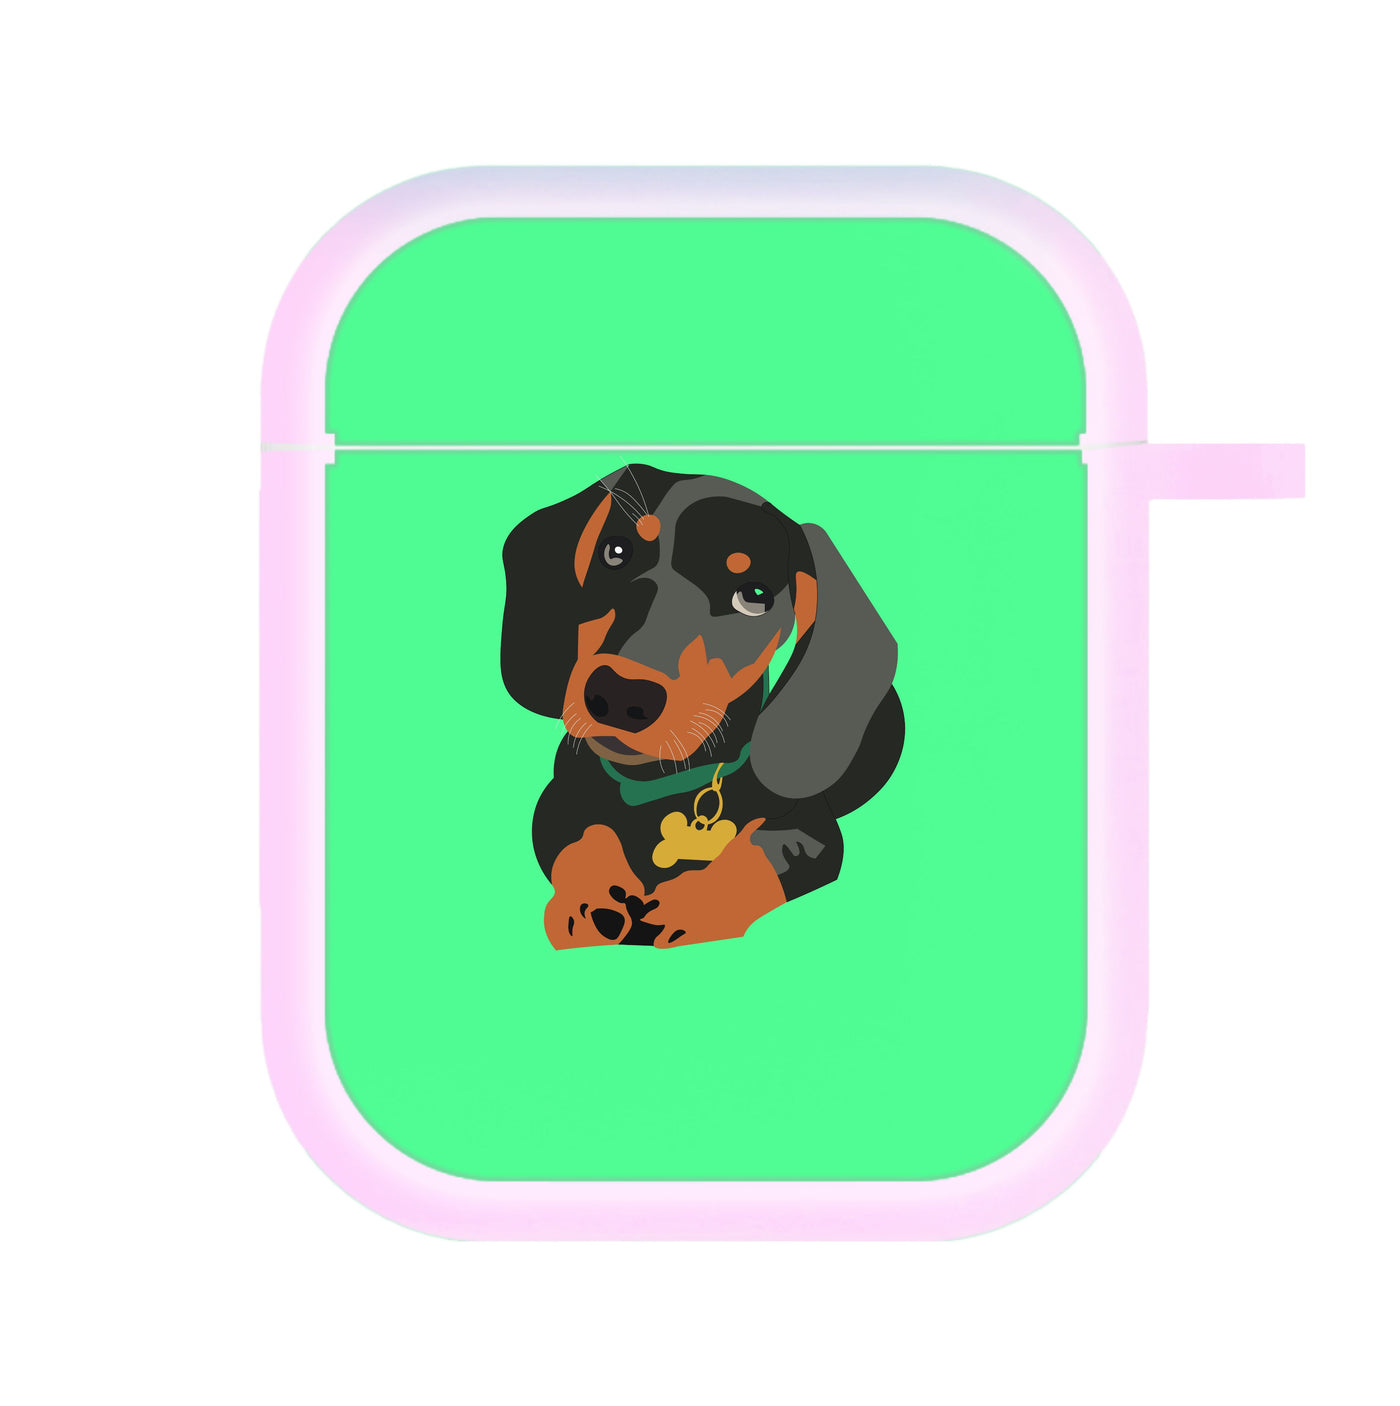 Black & brown - Dachshunds AirPods Case